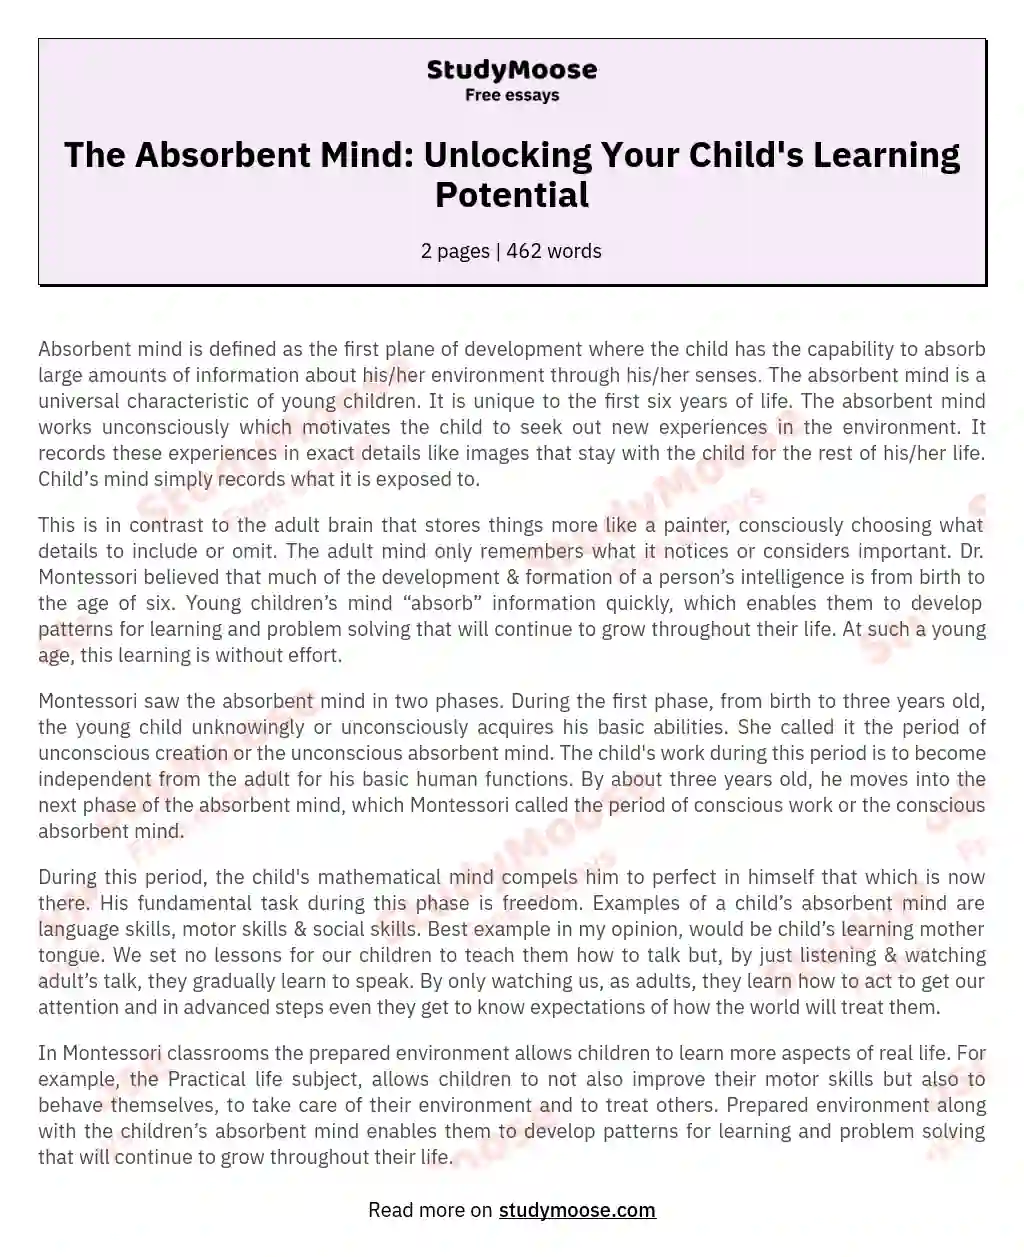 The Absorbent Mind: Unlocking Your Child's Learning Potential essay